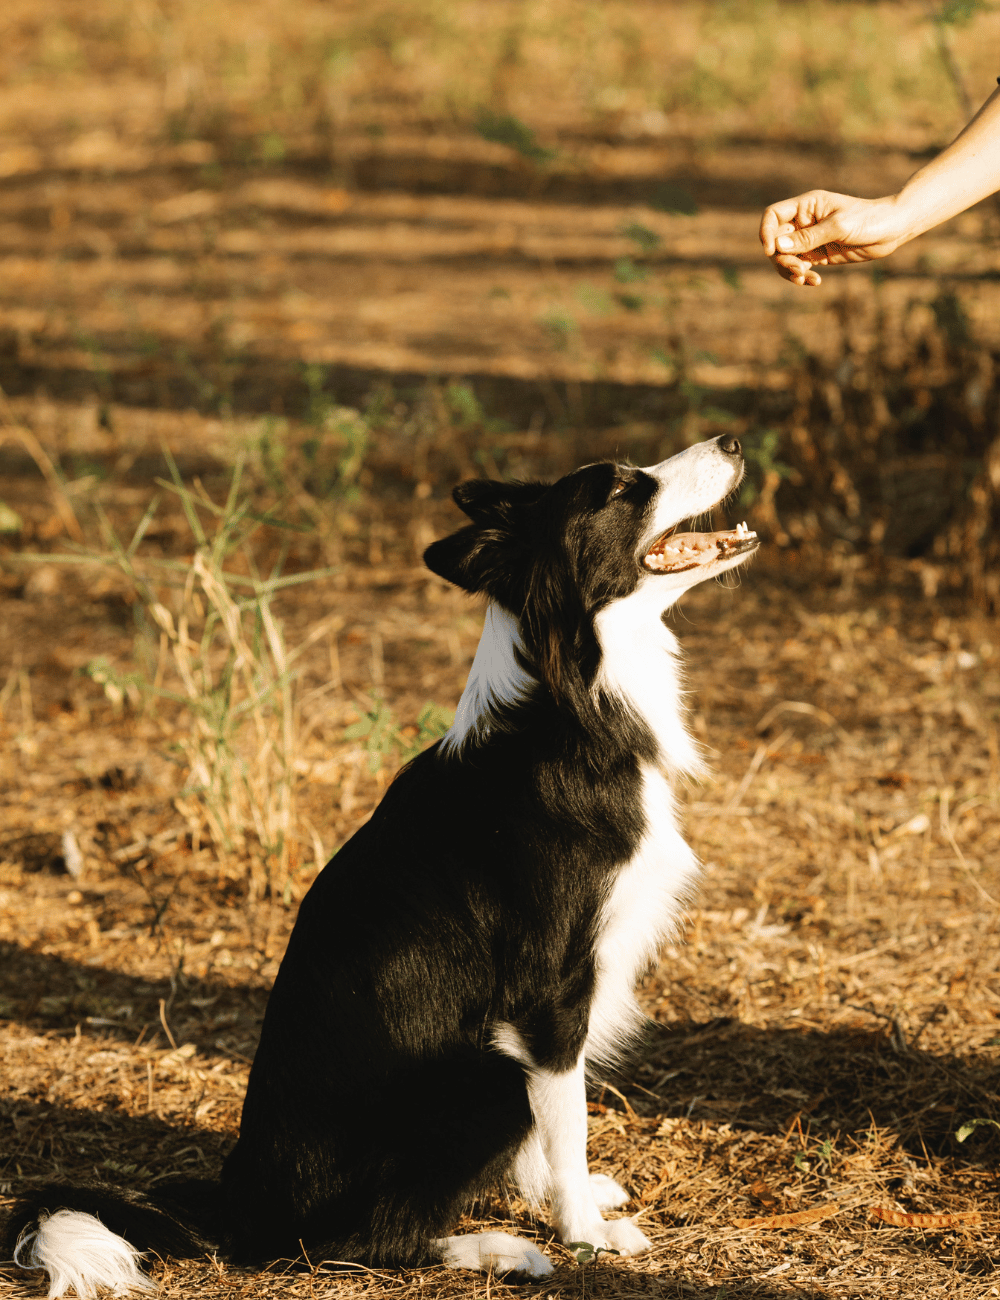 The 5 Most Delicious Dog Jerky Treats Your Pup is Sure to Love!